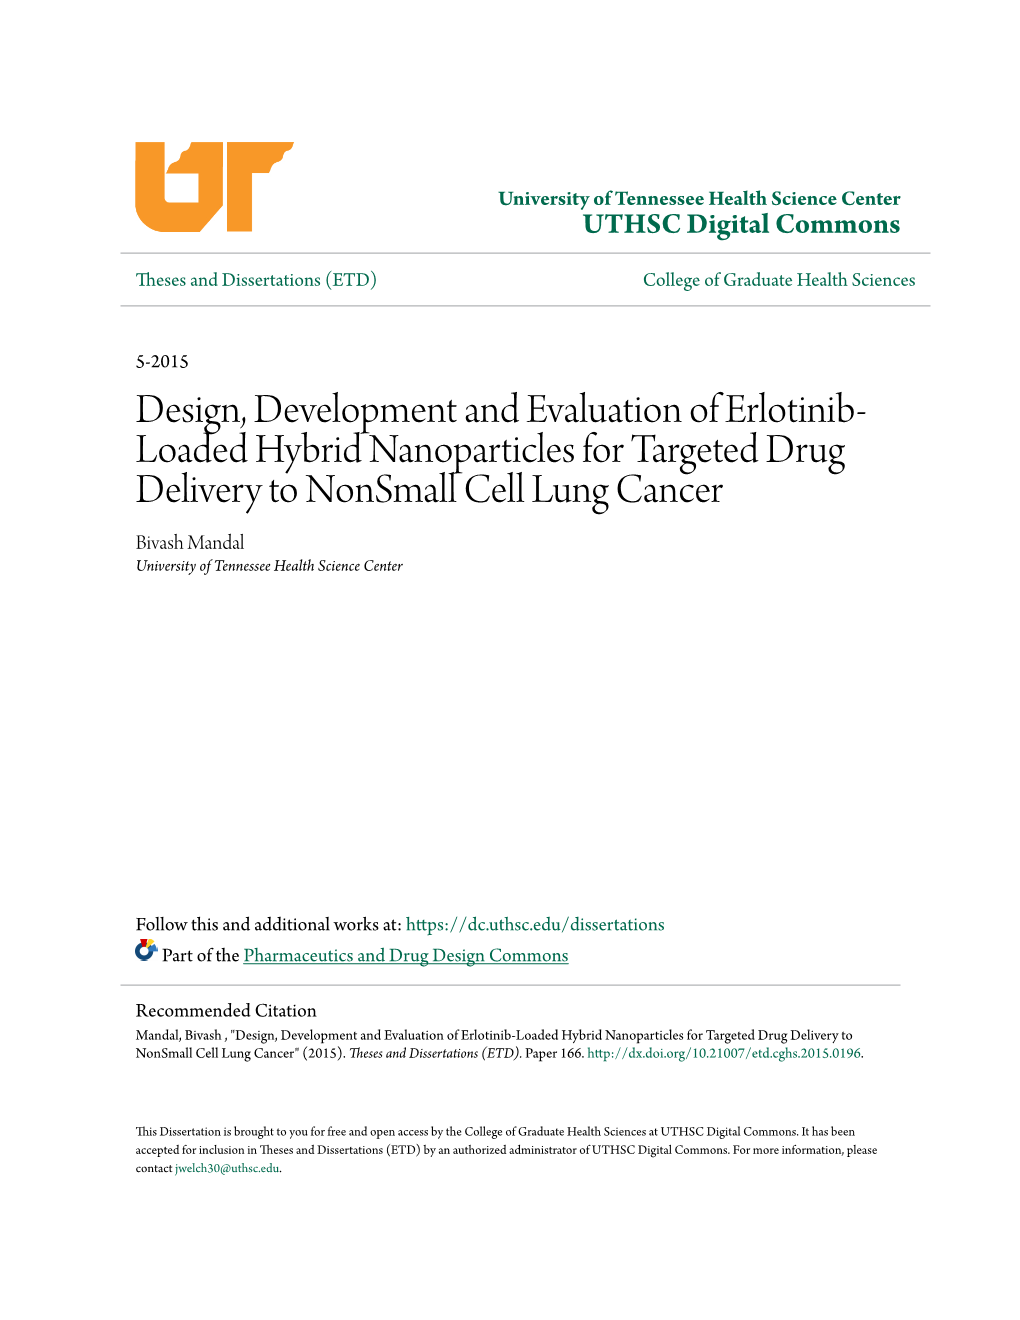 Design, Development and Evaluation of Erlotinib-Loaded Hybrid Nanoparticles for Targeted Drug Delivery to Nonsmall Cell Lung Cancer" (2015)